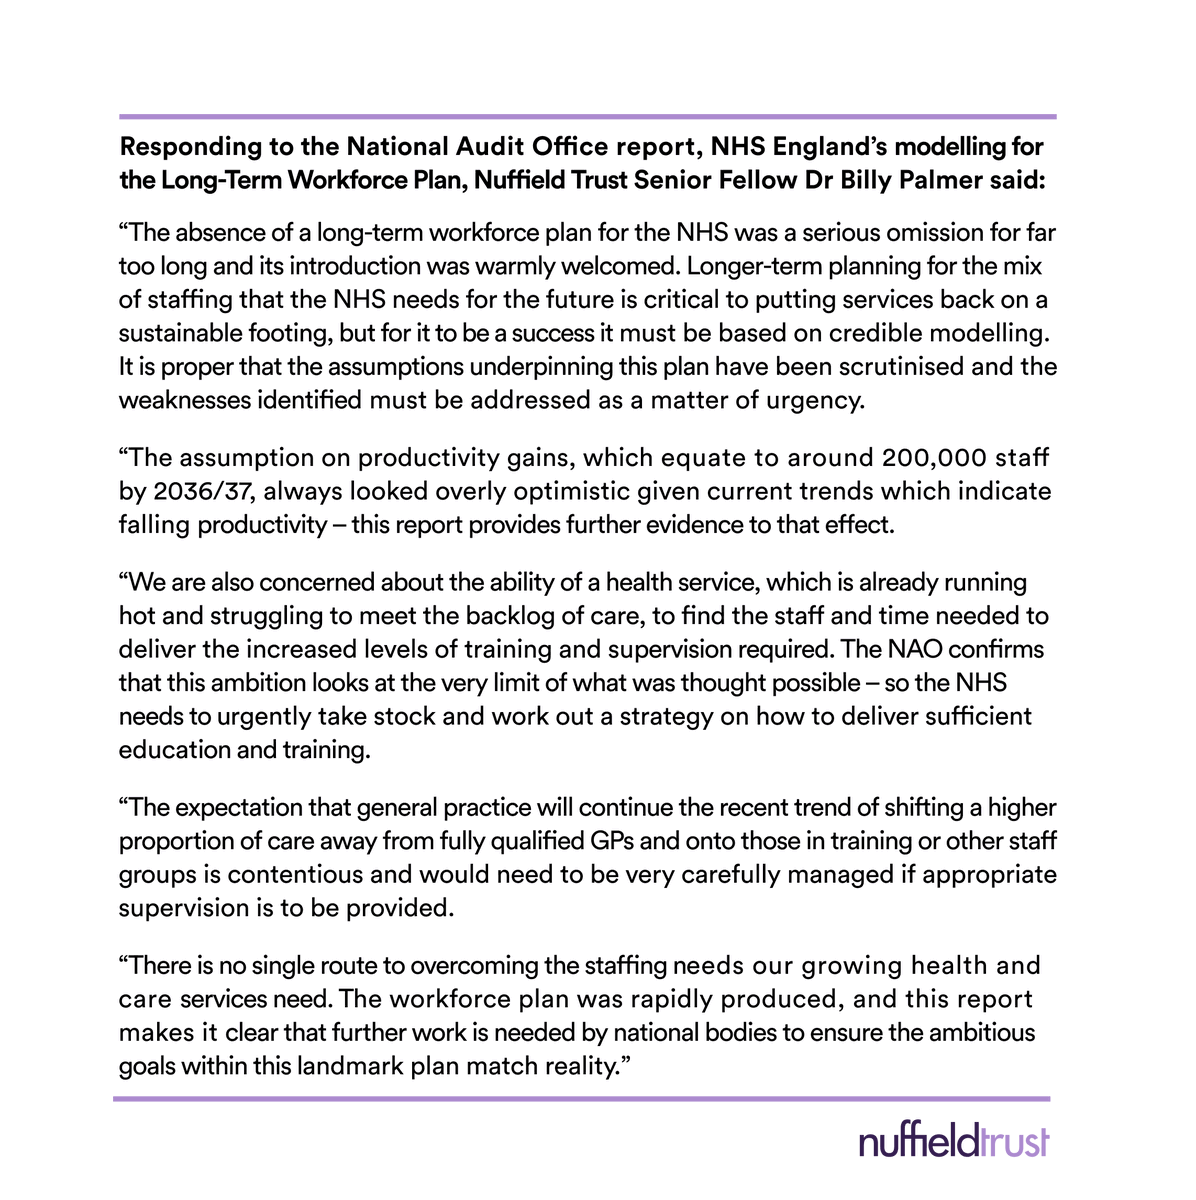 🆕 @Billy_Palmer_ responds to the @NAOorguk report on the #NHSWorkforcePlan. Ambitious goals in the plan must match reality. 👉nuffieldtrust.org.uk/news-item/ambi…